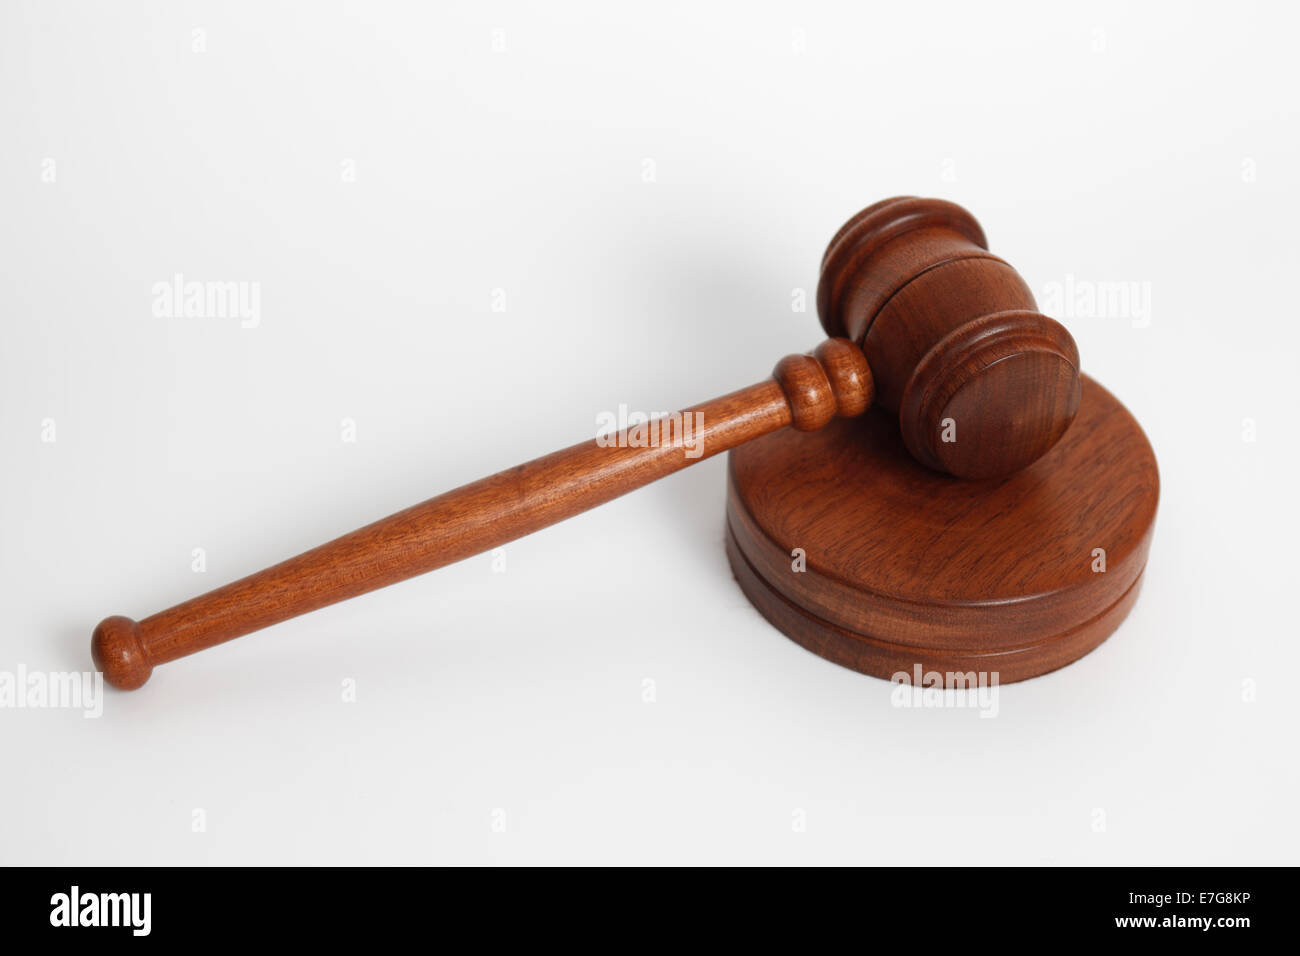 tabletop image of a traditional Gavel as used in courts of law in the United States. Stock Photo